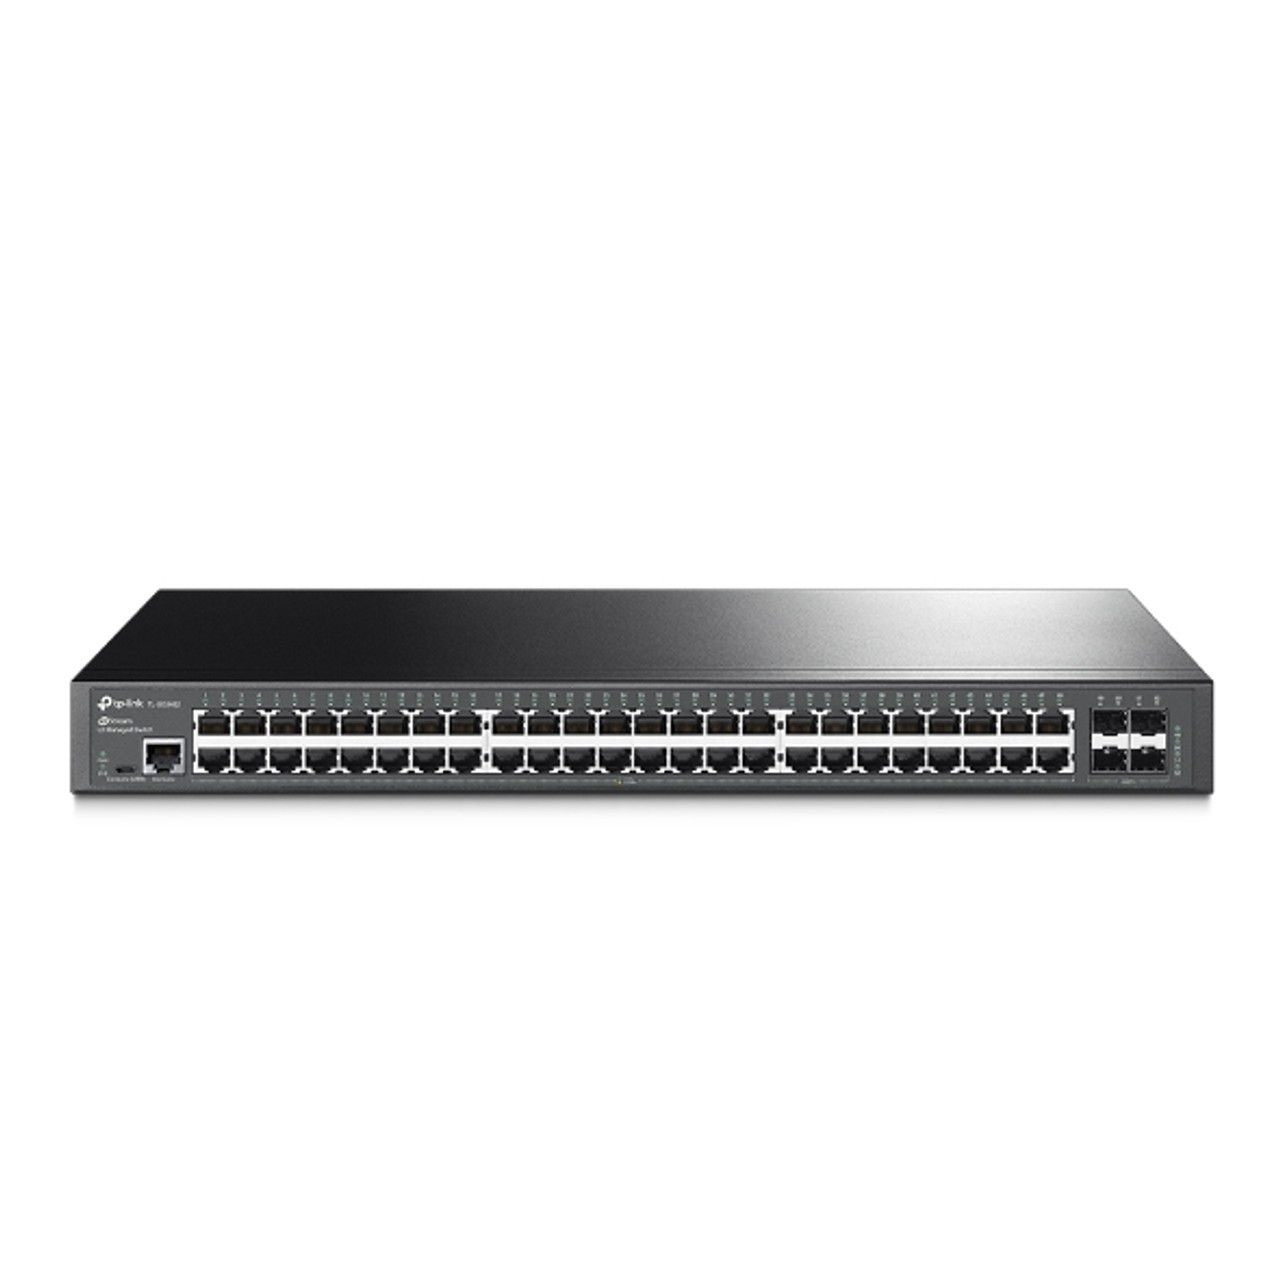 into shop Managed Management, with Gigabit Routing SDN, 4 TP-LINK Centralised Slots, Omada Integrated 48-Port at L2 Static AUSTiC Switch SHOP (L-NWTL-SG3452) SFP JetStream TL-SG3452